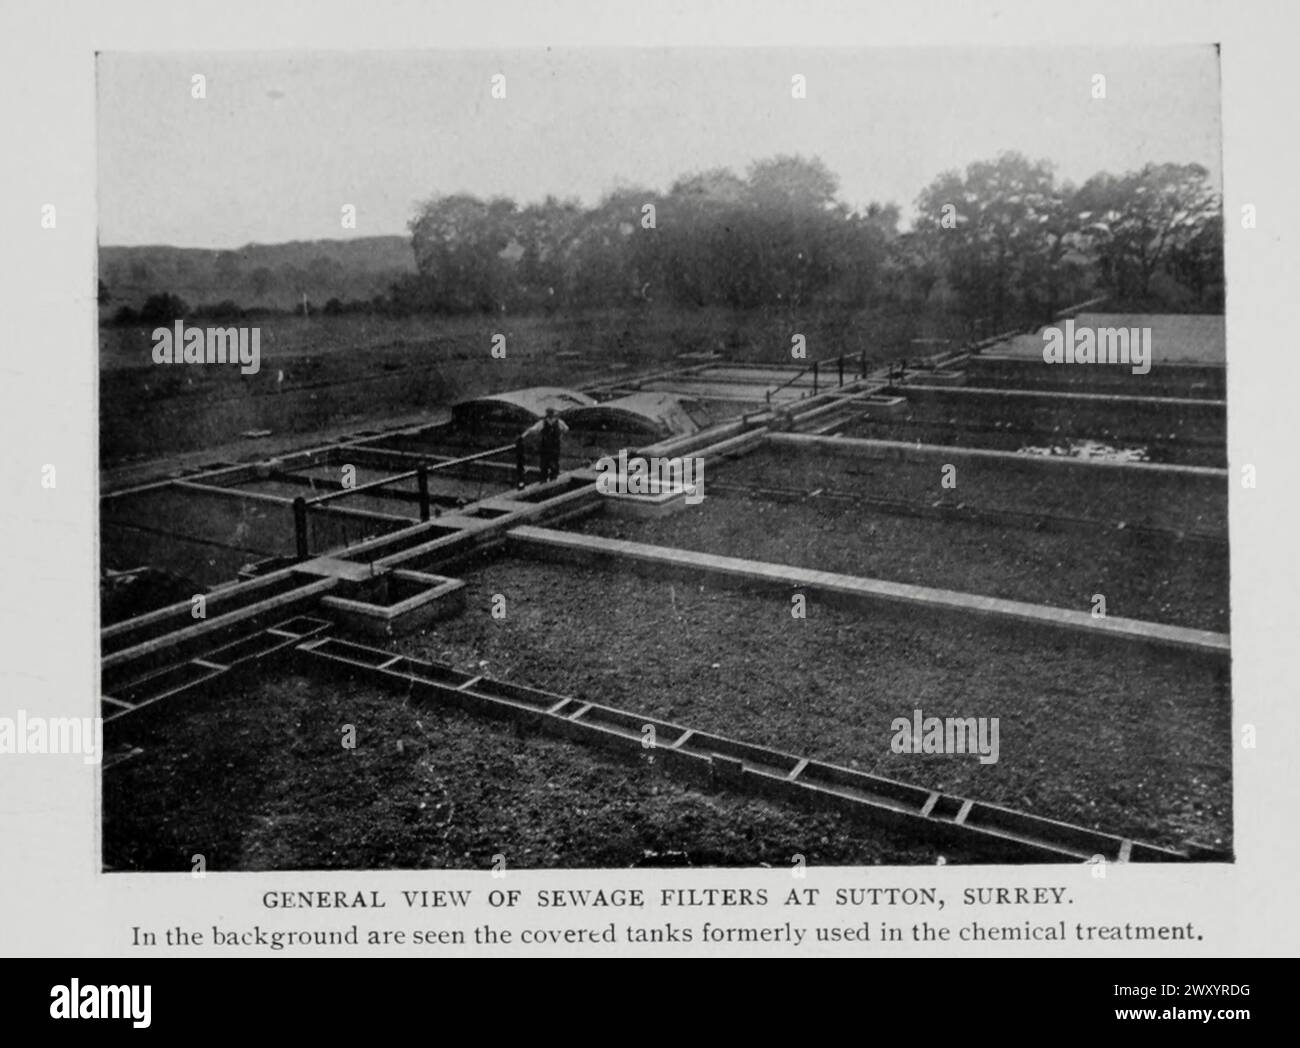 GENERAL VIEW OF SEWAGE FILTERS AT SUTTON, SURREY, England. In the background are seen the covered tanks formerly used in the chemical treatment. from the Article BACTERIAL PROCESSES OF SEWAGE PURIFICATION. By Rudolph Hering. from The Engineering Magazine Devoted to Industrial Progress Volume XV 1898 The Engineering Magazine Co Stock Photo